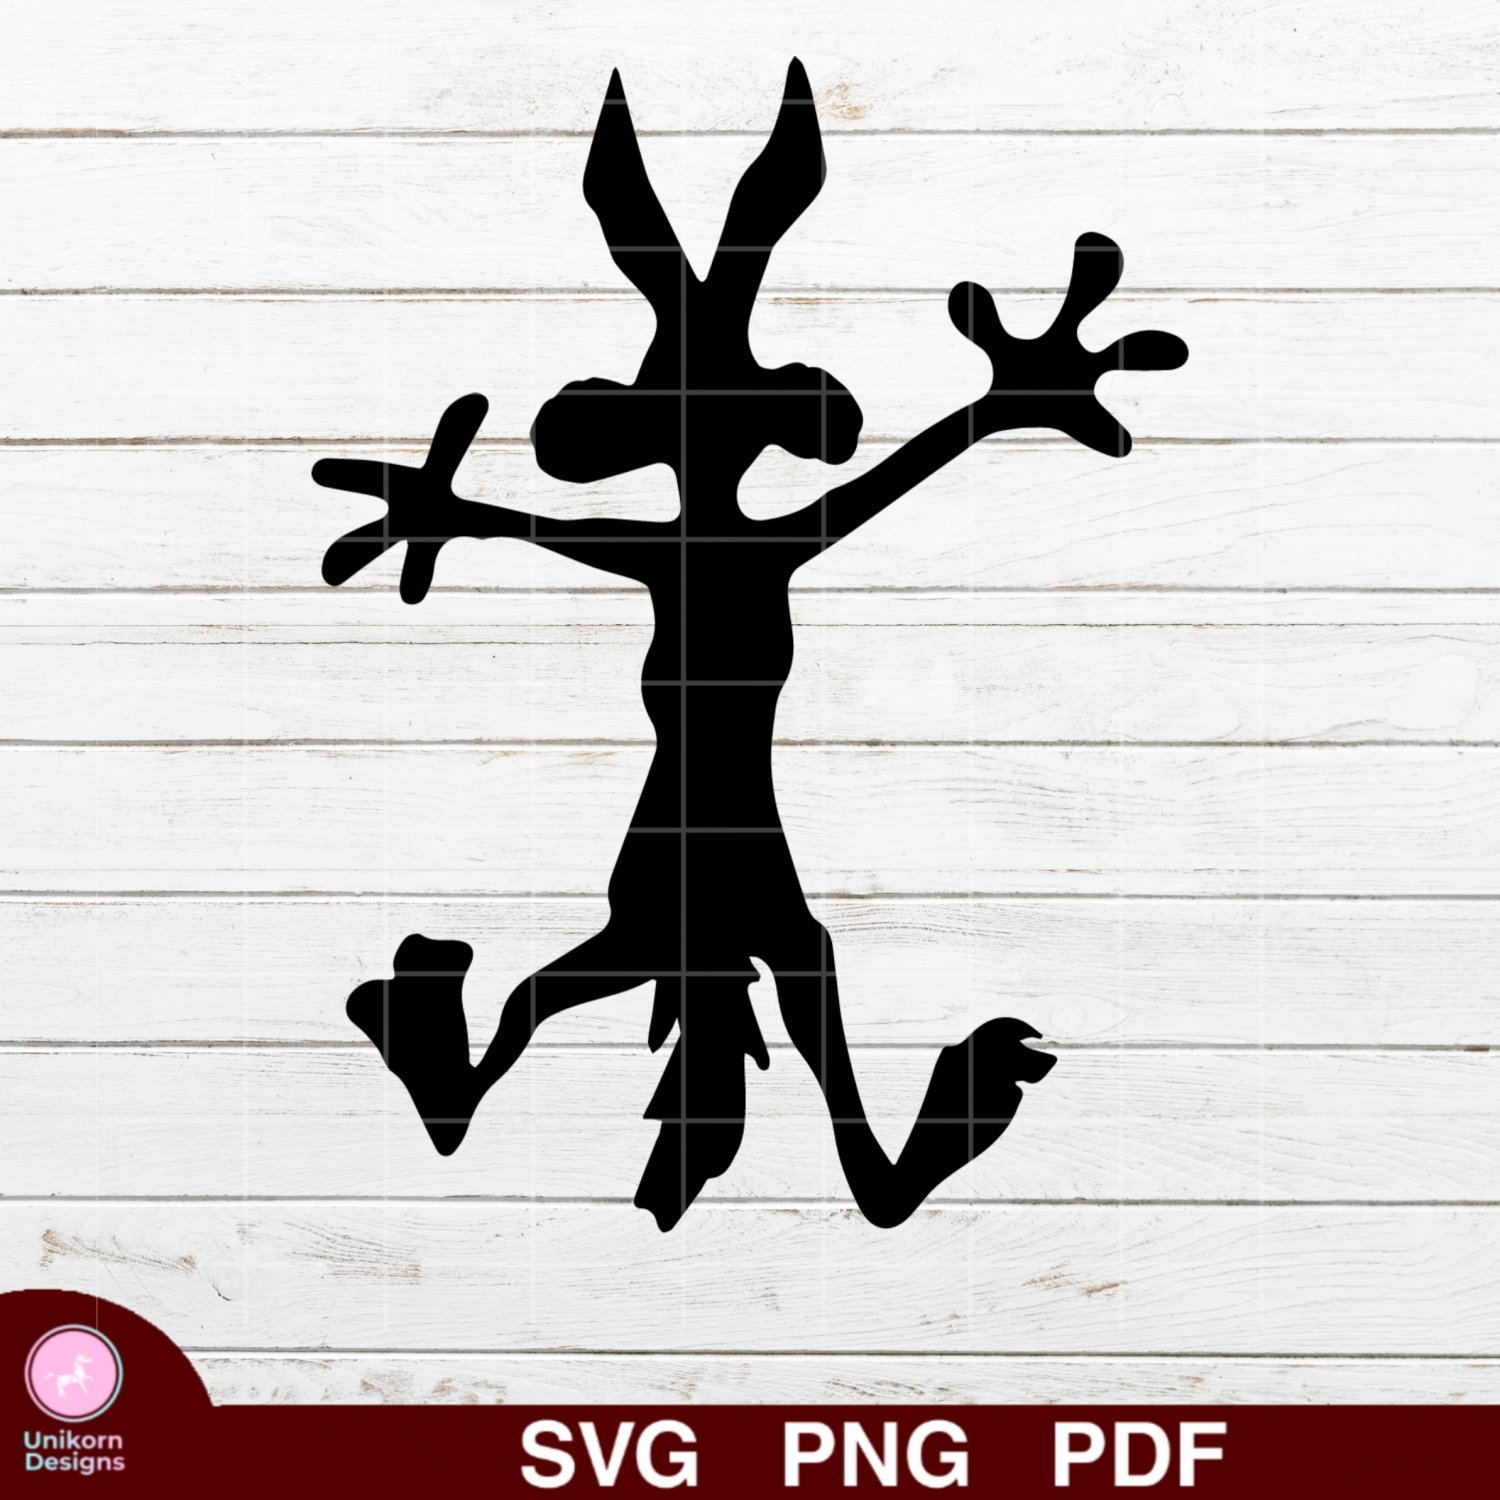 Cayote Splat Design 1 SVG PNG Silhouette Cut Files Cricut Vector Graphic Clipart Instant Download